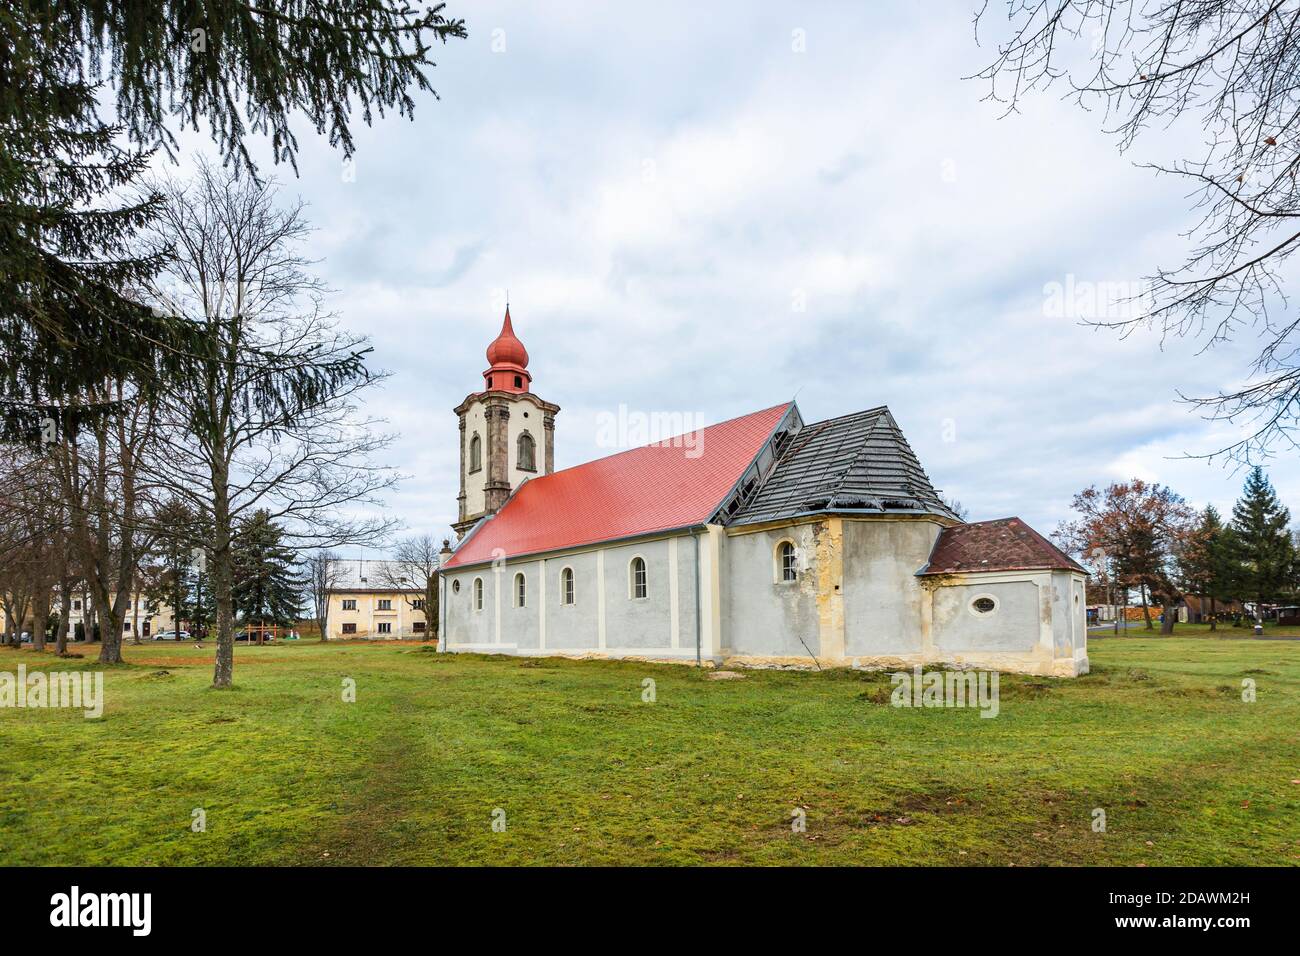 Nova Ves / Czech Republic - November 15 2020: View of the roman catholic church of the Most Holy Trinity built in the 18th century standing in a park. Stock Photo